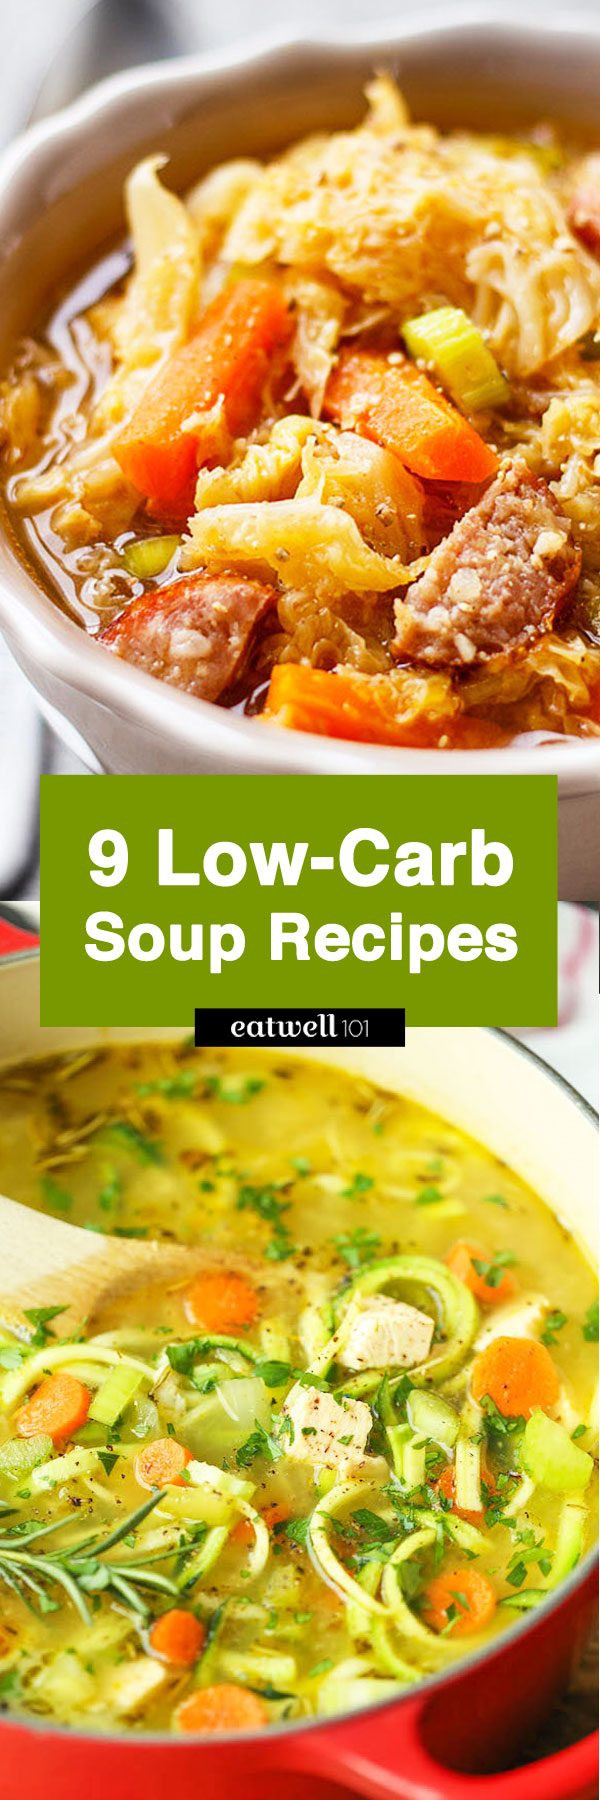 101 Low Carb Recipes
 9 Low Carb Soup Recipes to Stay Warm and Full of Energy